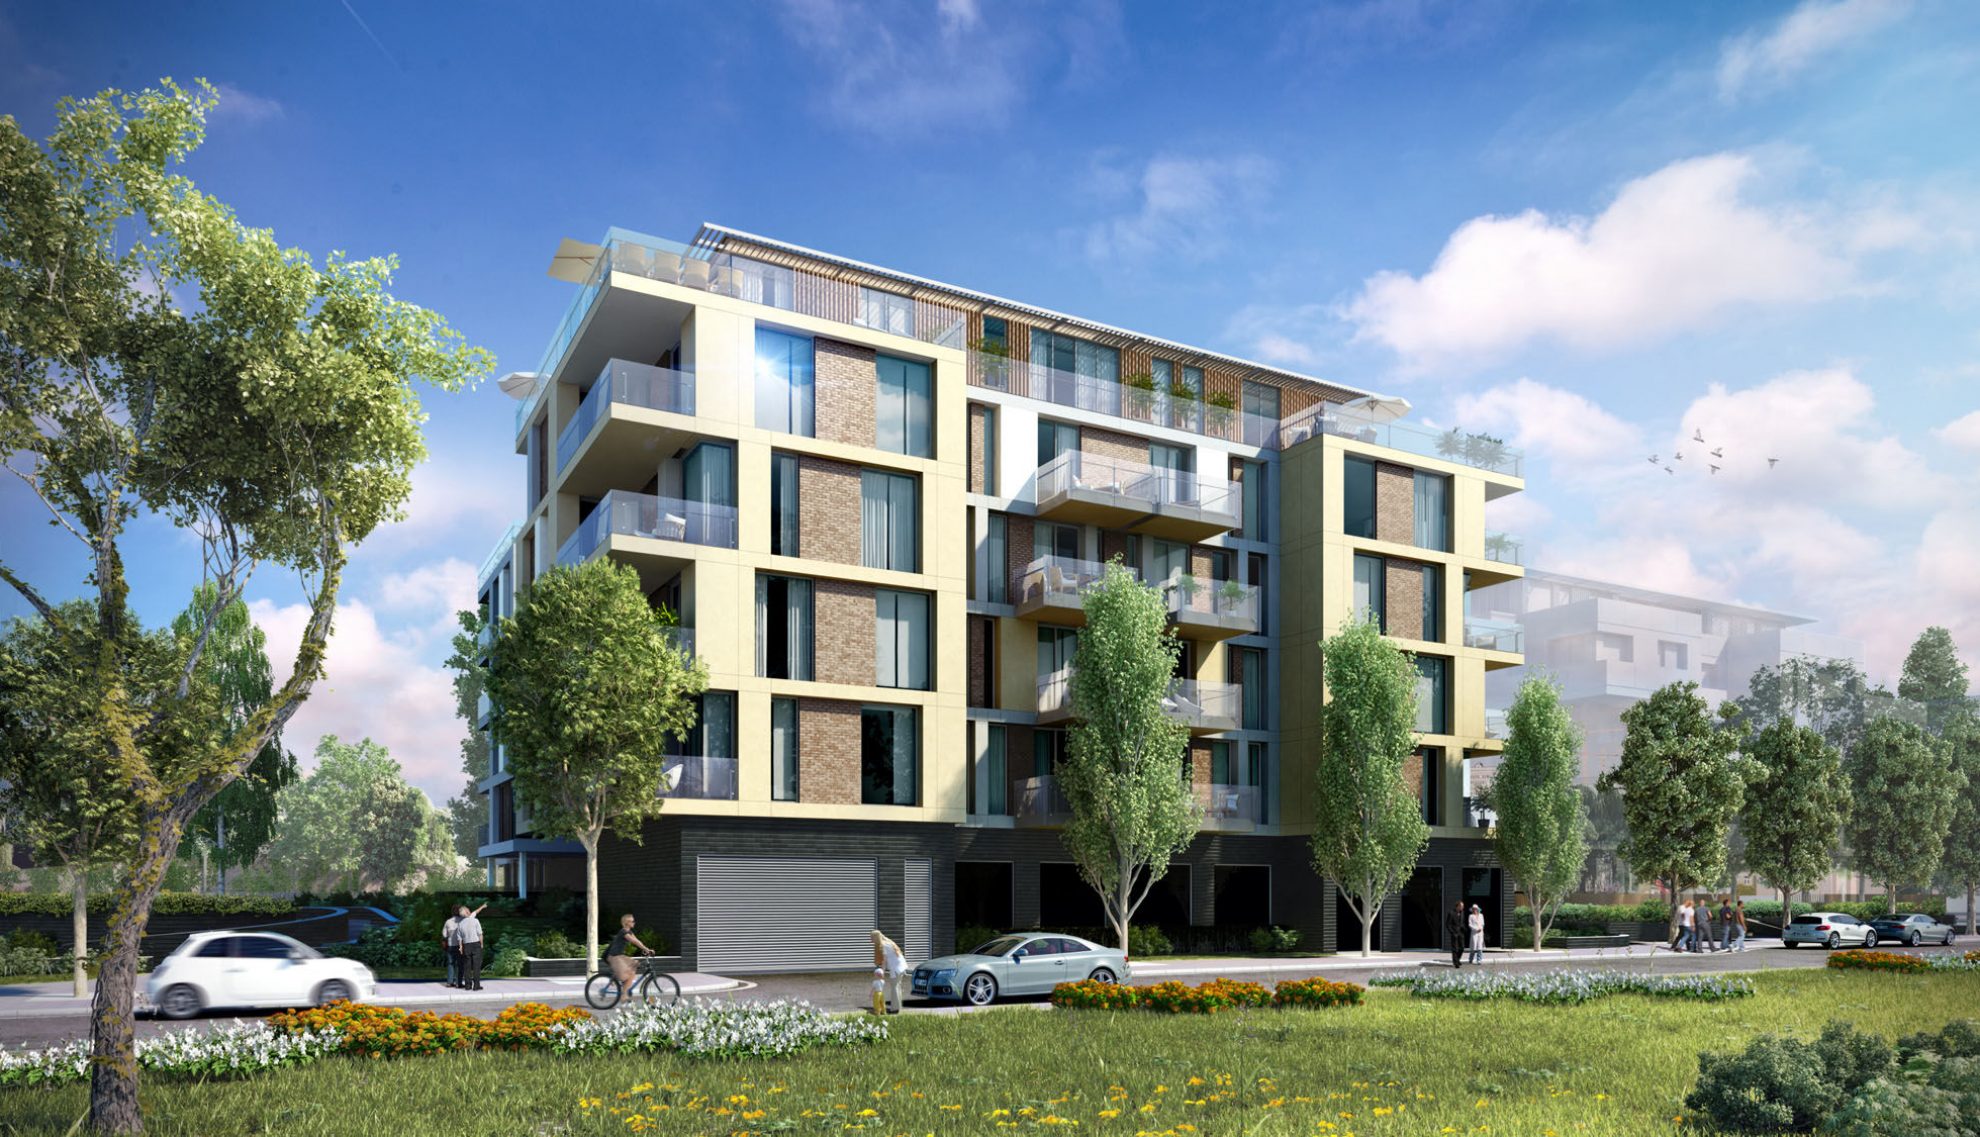 Quebec Quarter new build homes in Rotherhithe